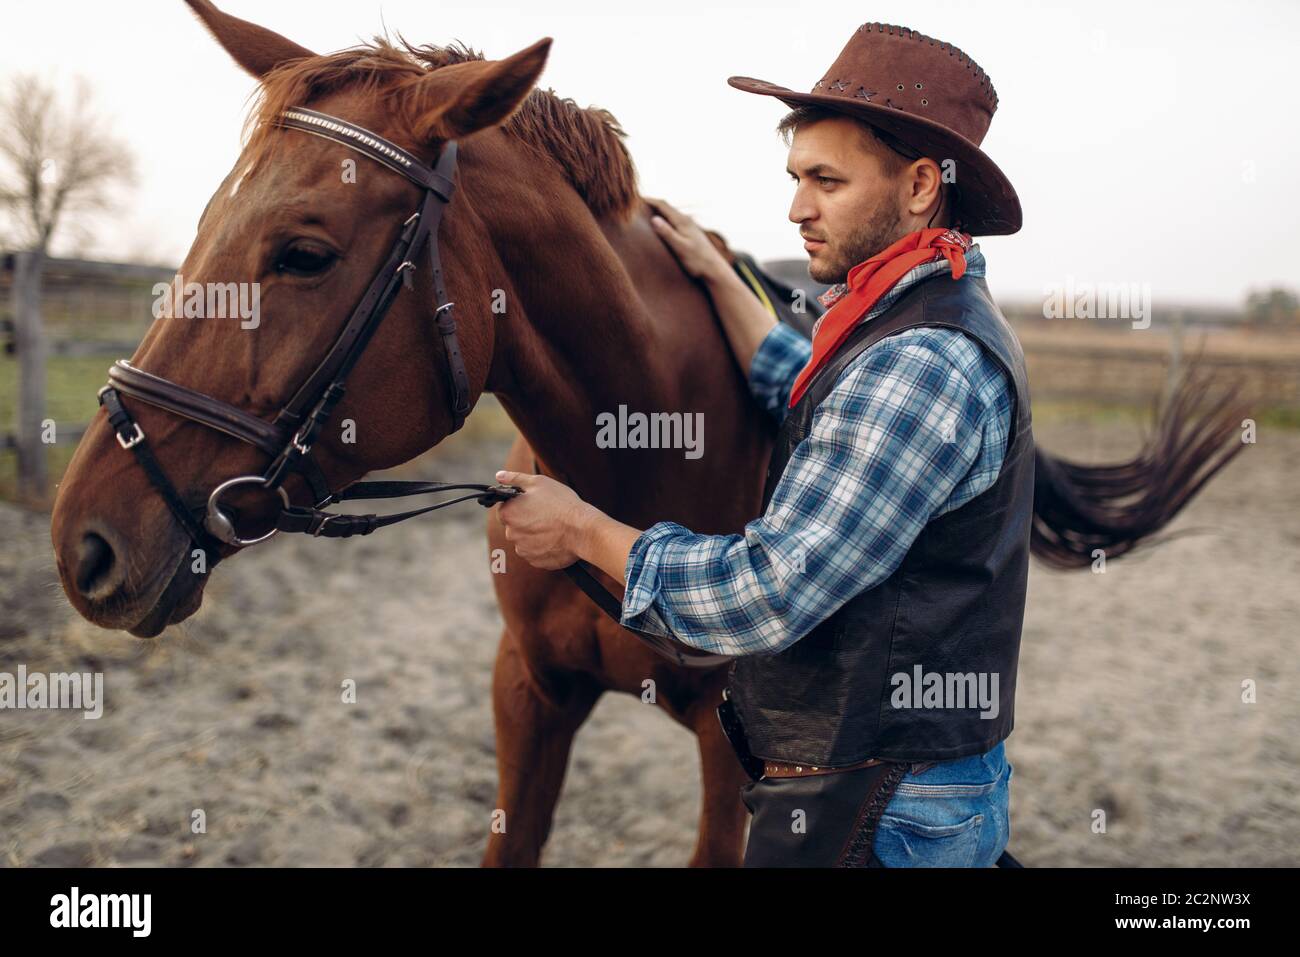 Cowboy in jeans and leather jacket poses with horse on texas ranch ...